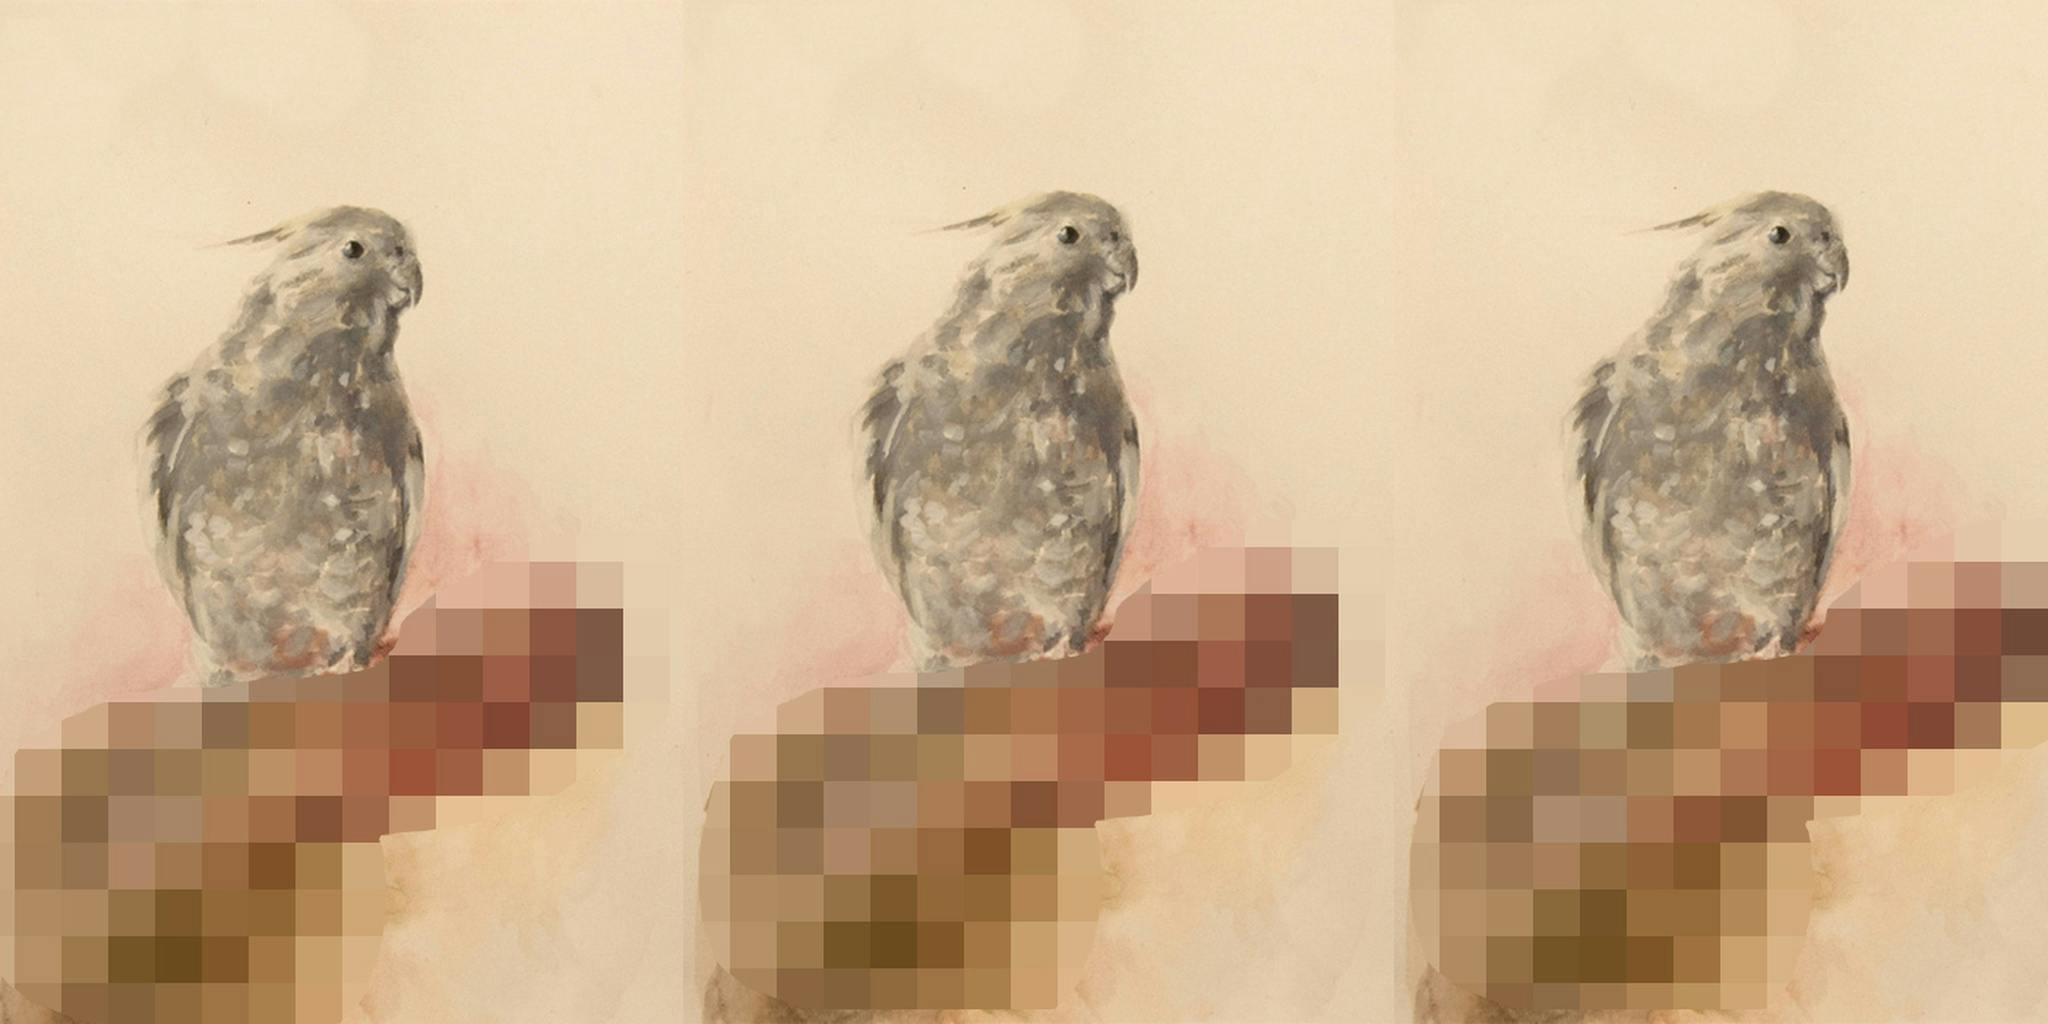 This artist’s totally NSFW bird paintings are flying off the Etsy shelves